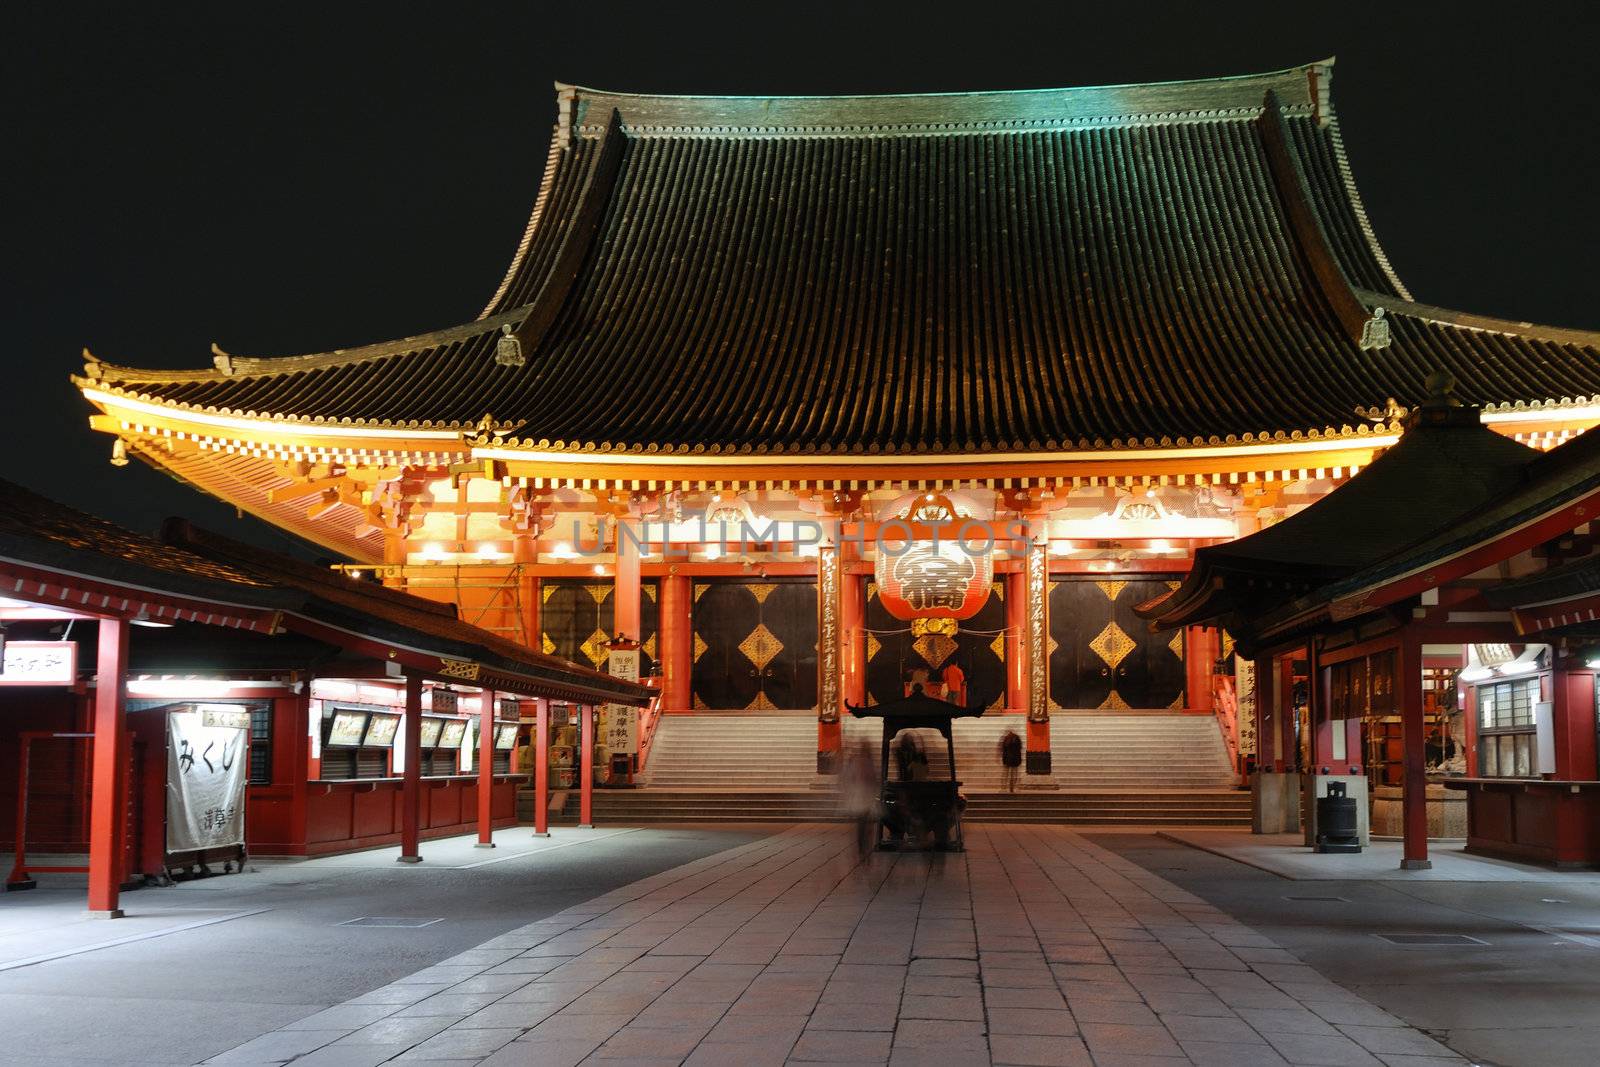 famous Tokyo landmark, Asakusa Temple by night with blurred by long exposure visitors movement, Japan